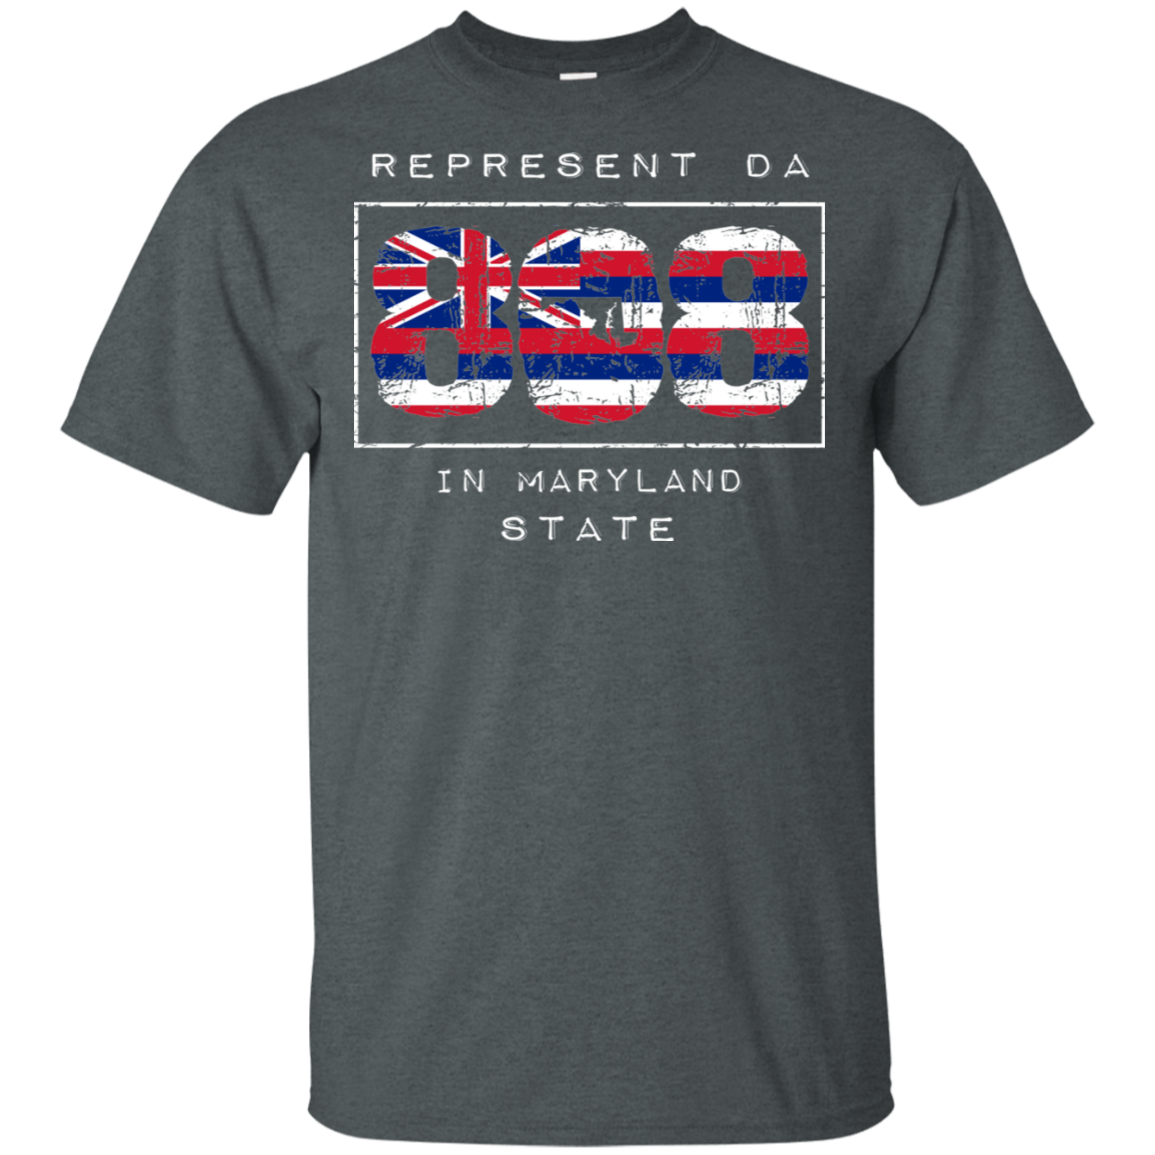 Rep Da 808 In Maryland State Ultra Cotton T-Shirt, T-Shirts, Hawaii Nei All Day